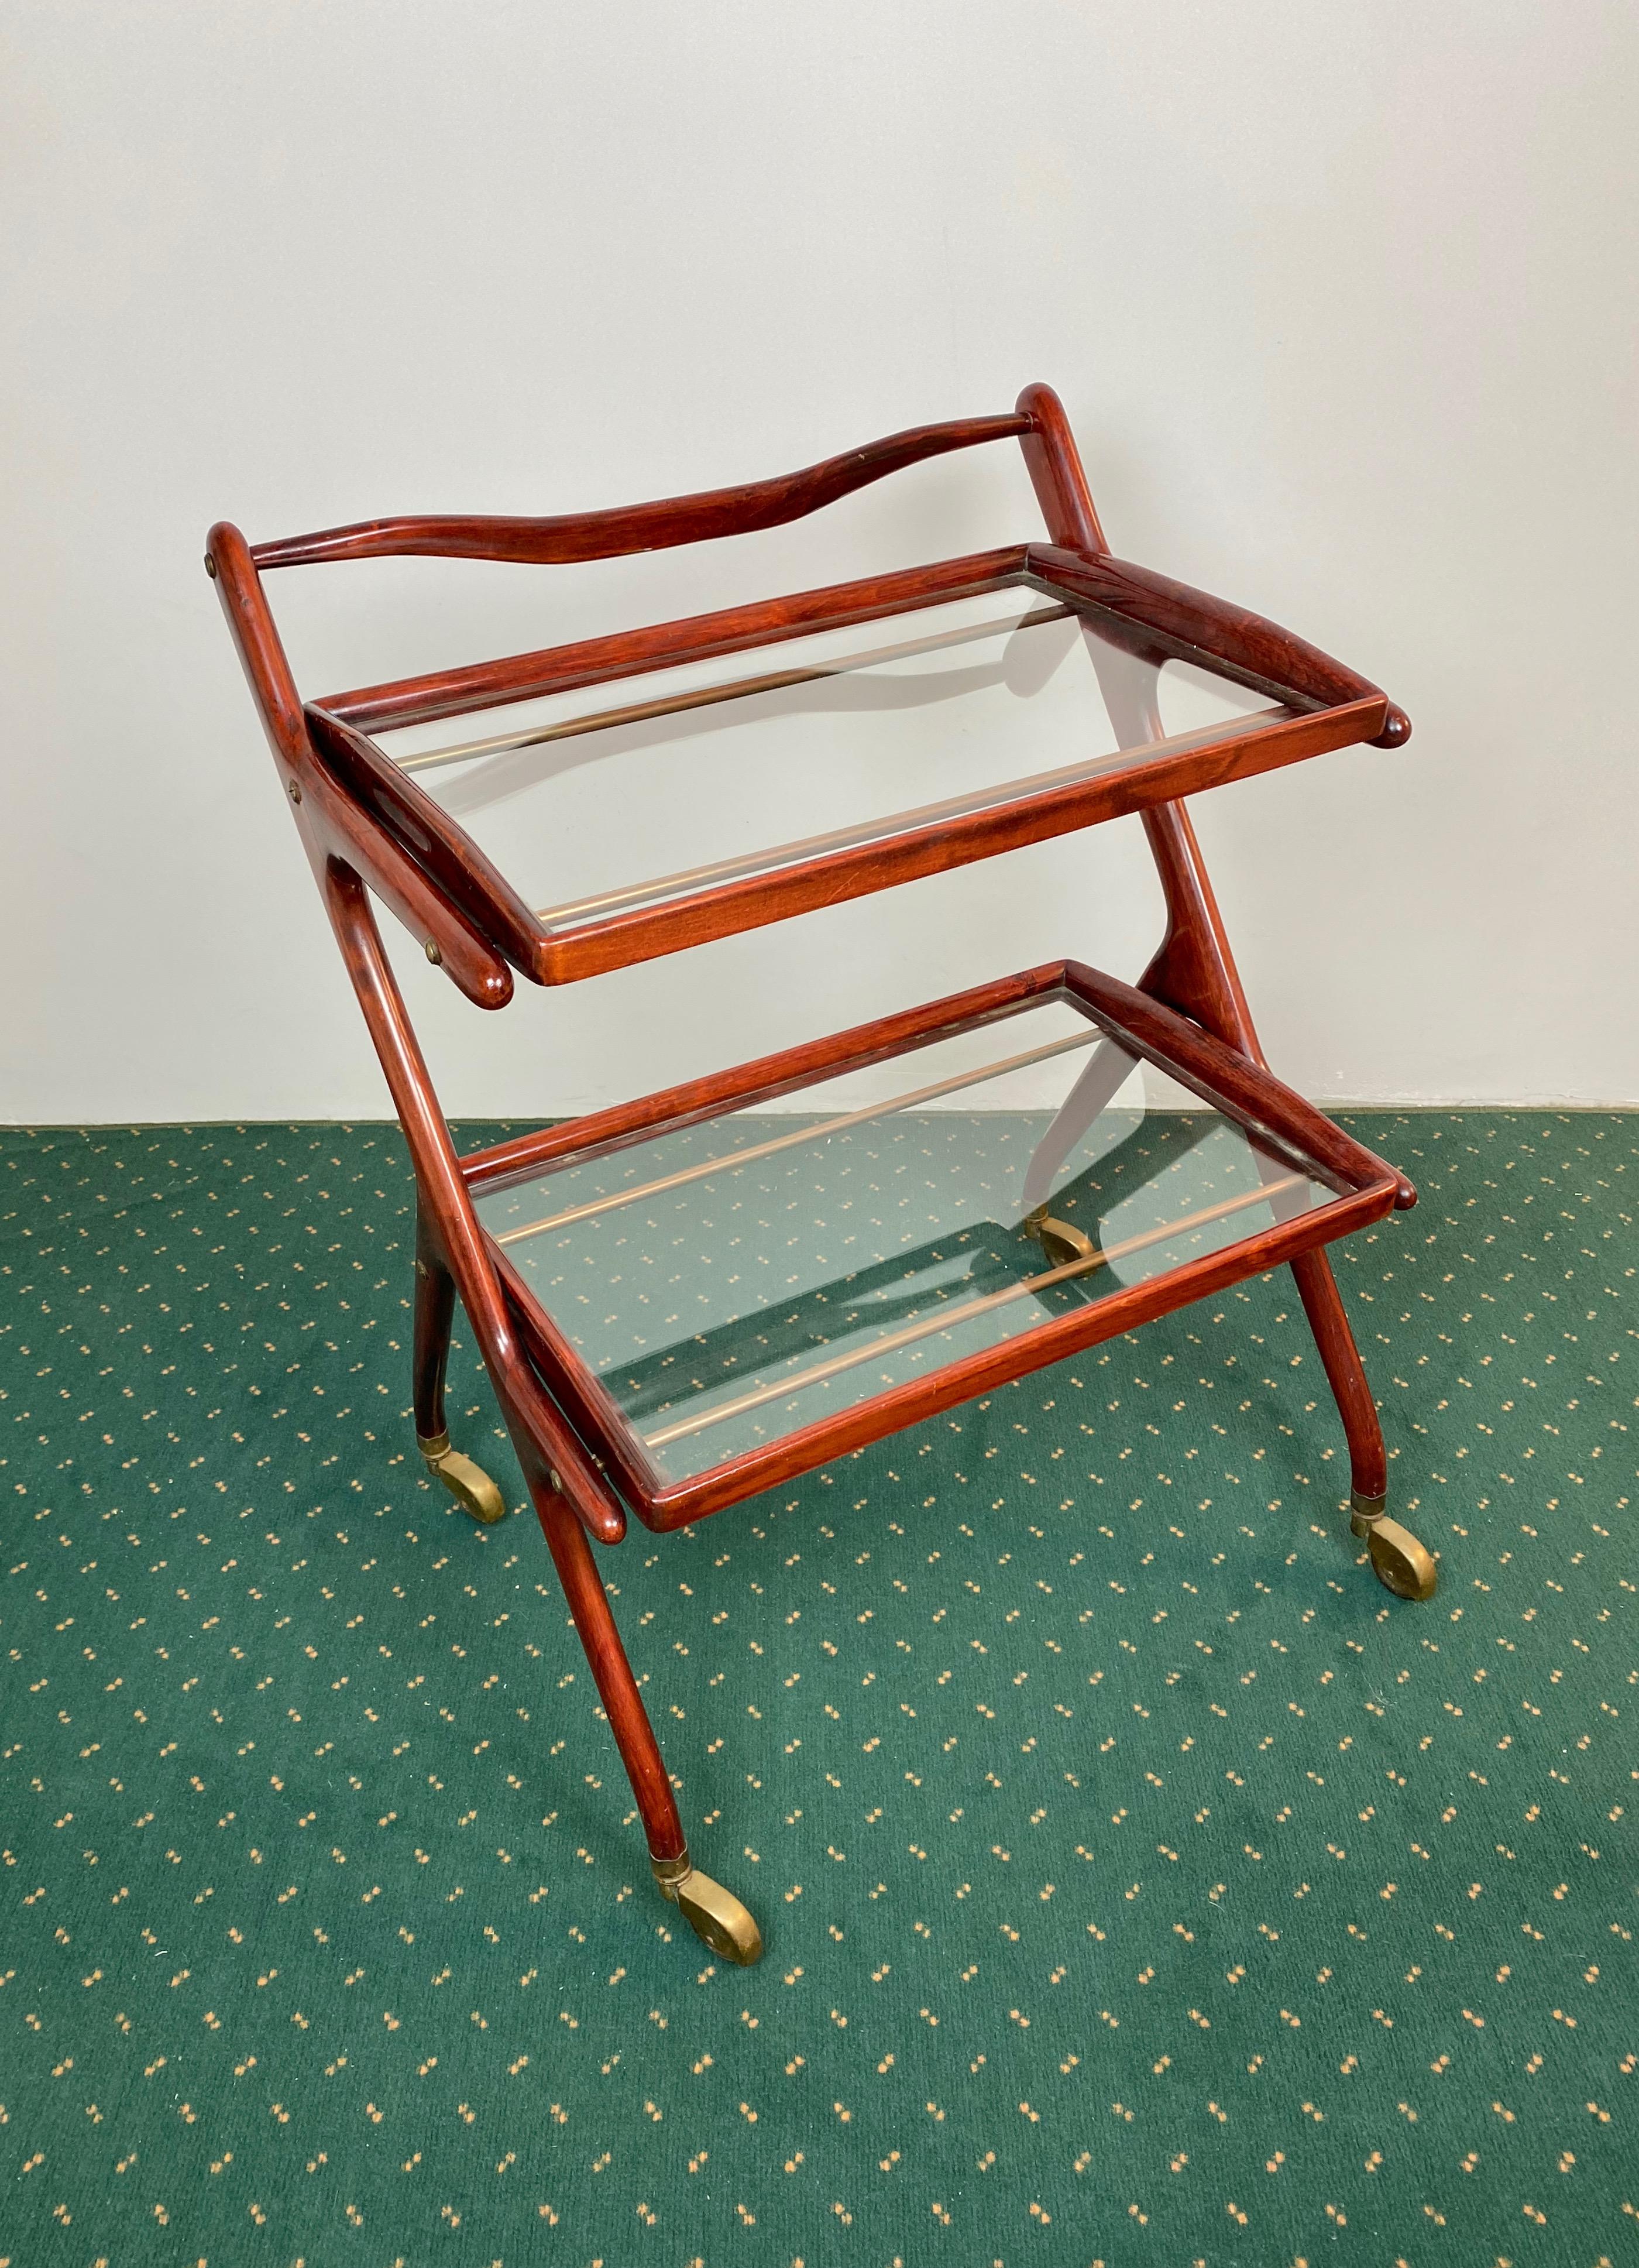 Serving bar cart in wood and brass details composed of two removable glass trays by the Italian designer Cesare Lacca, 1950s.